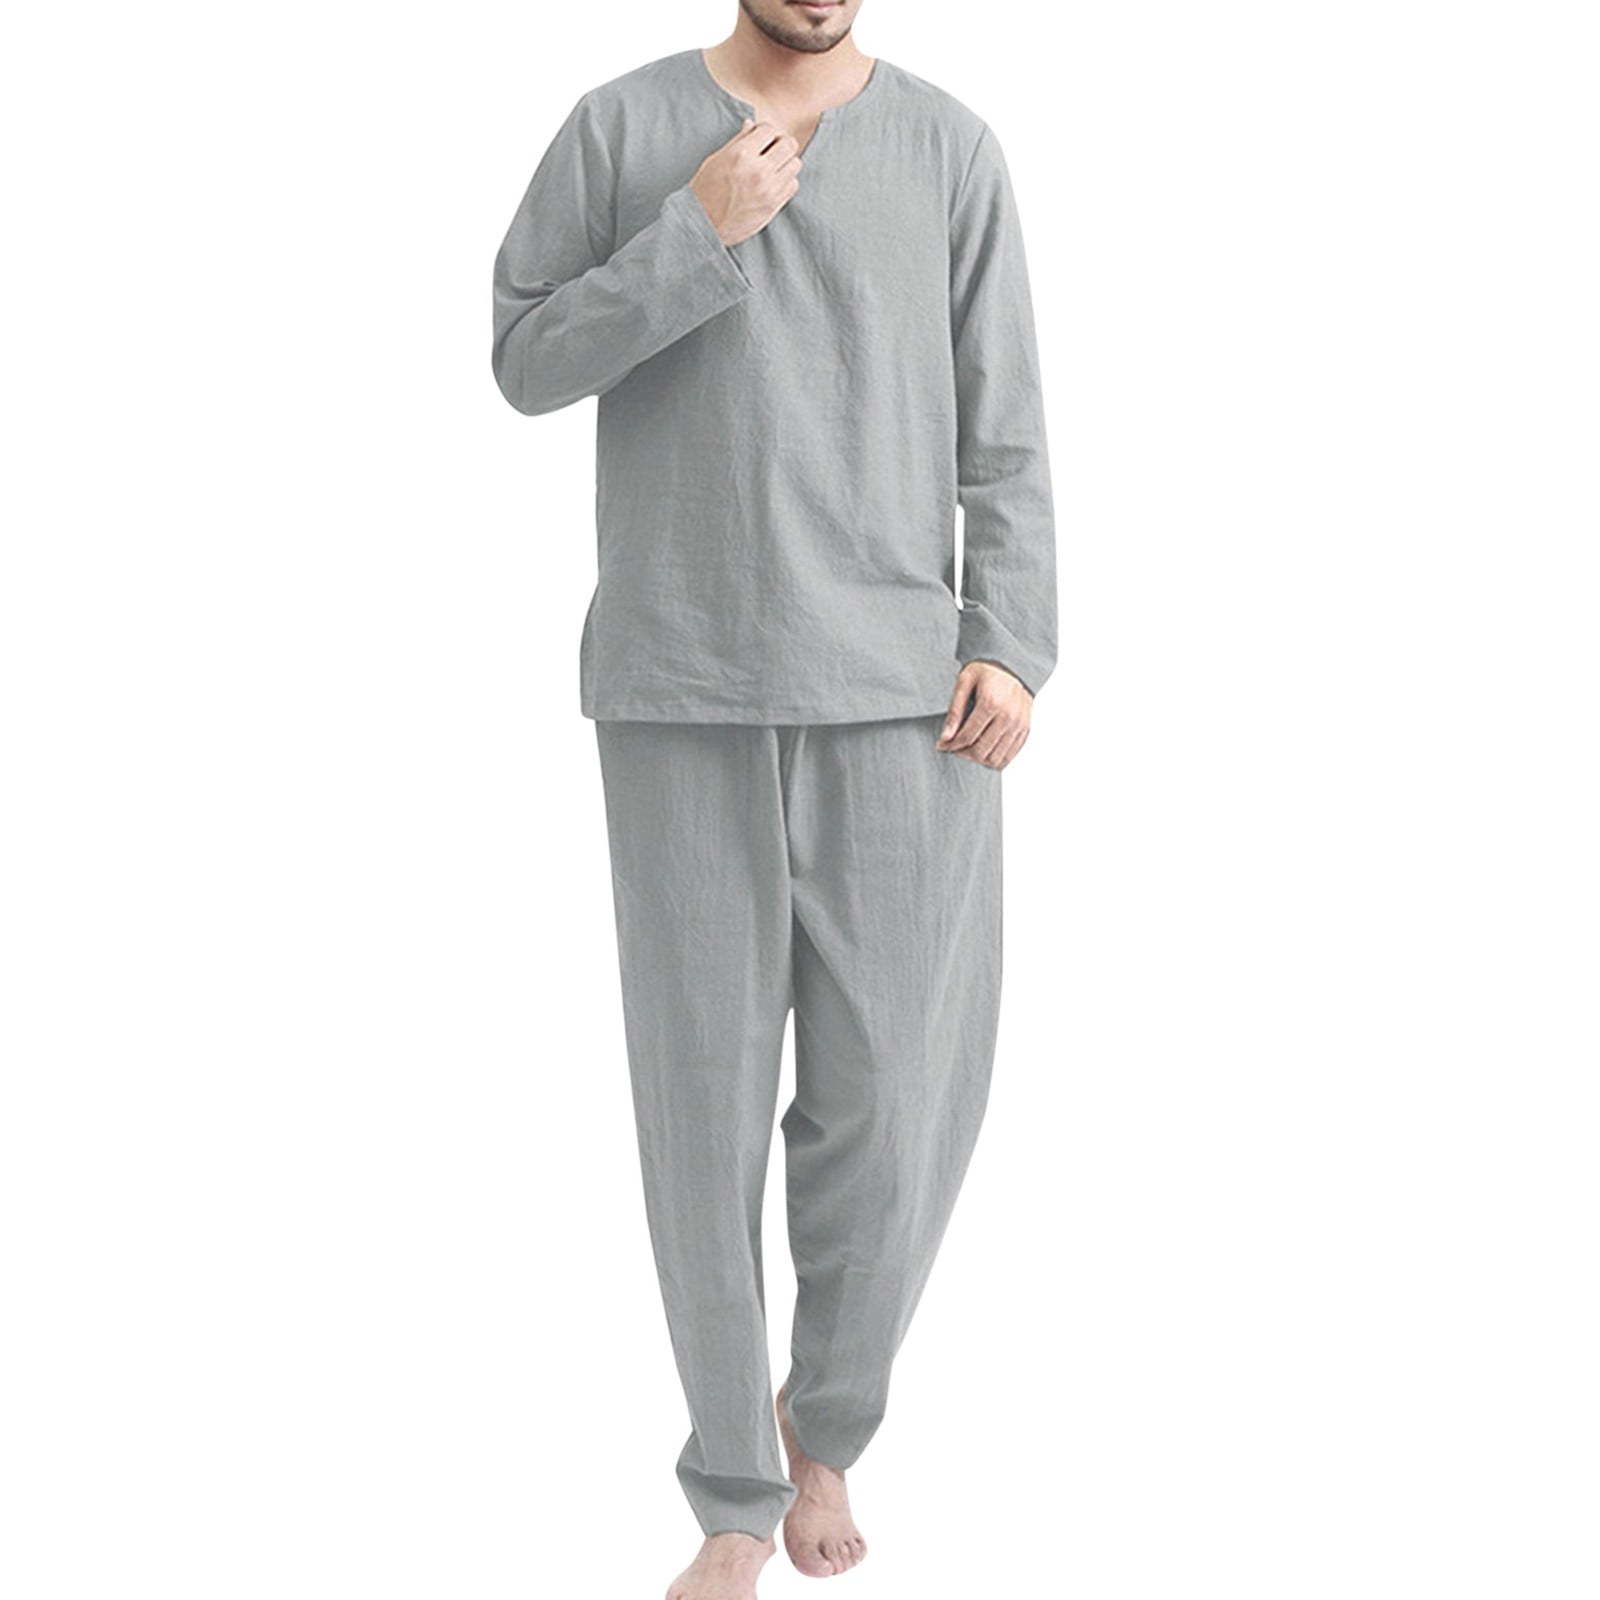 Outfmvch hoodies for men Casual Solid Long Sleeve Pant Set Pajamas ...